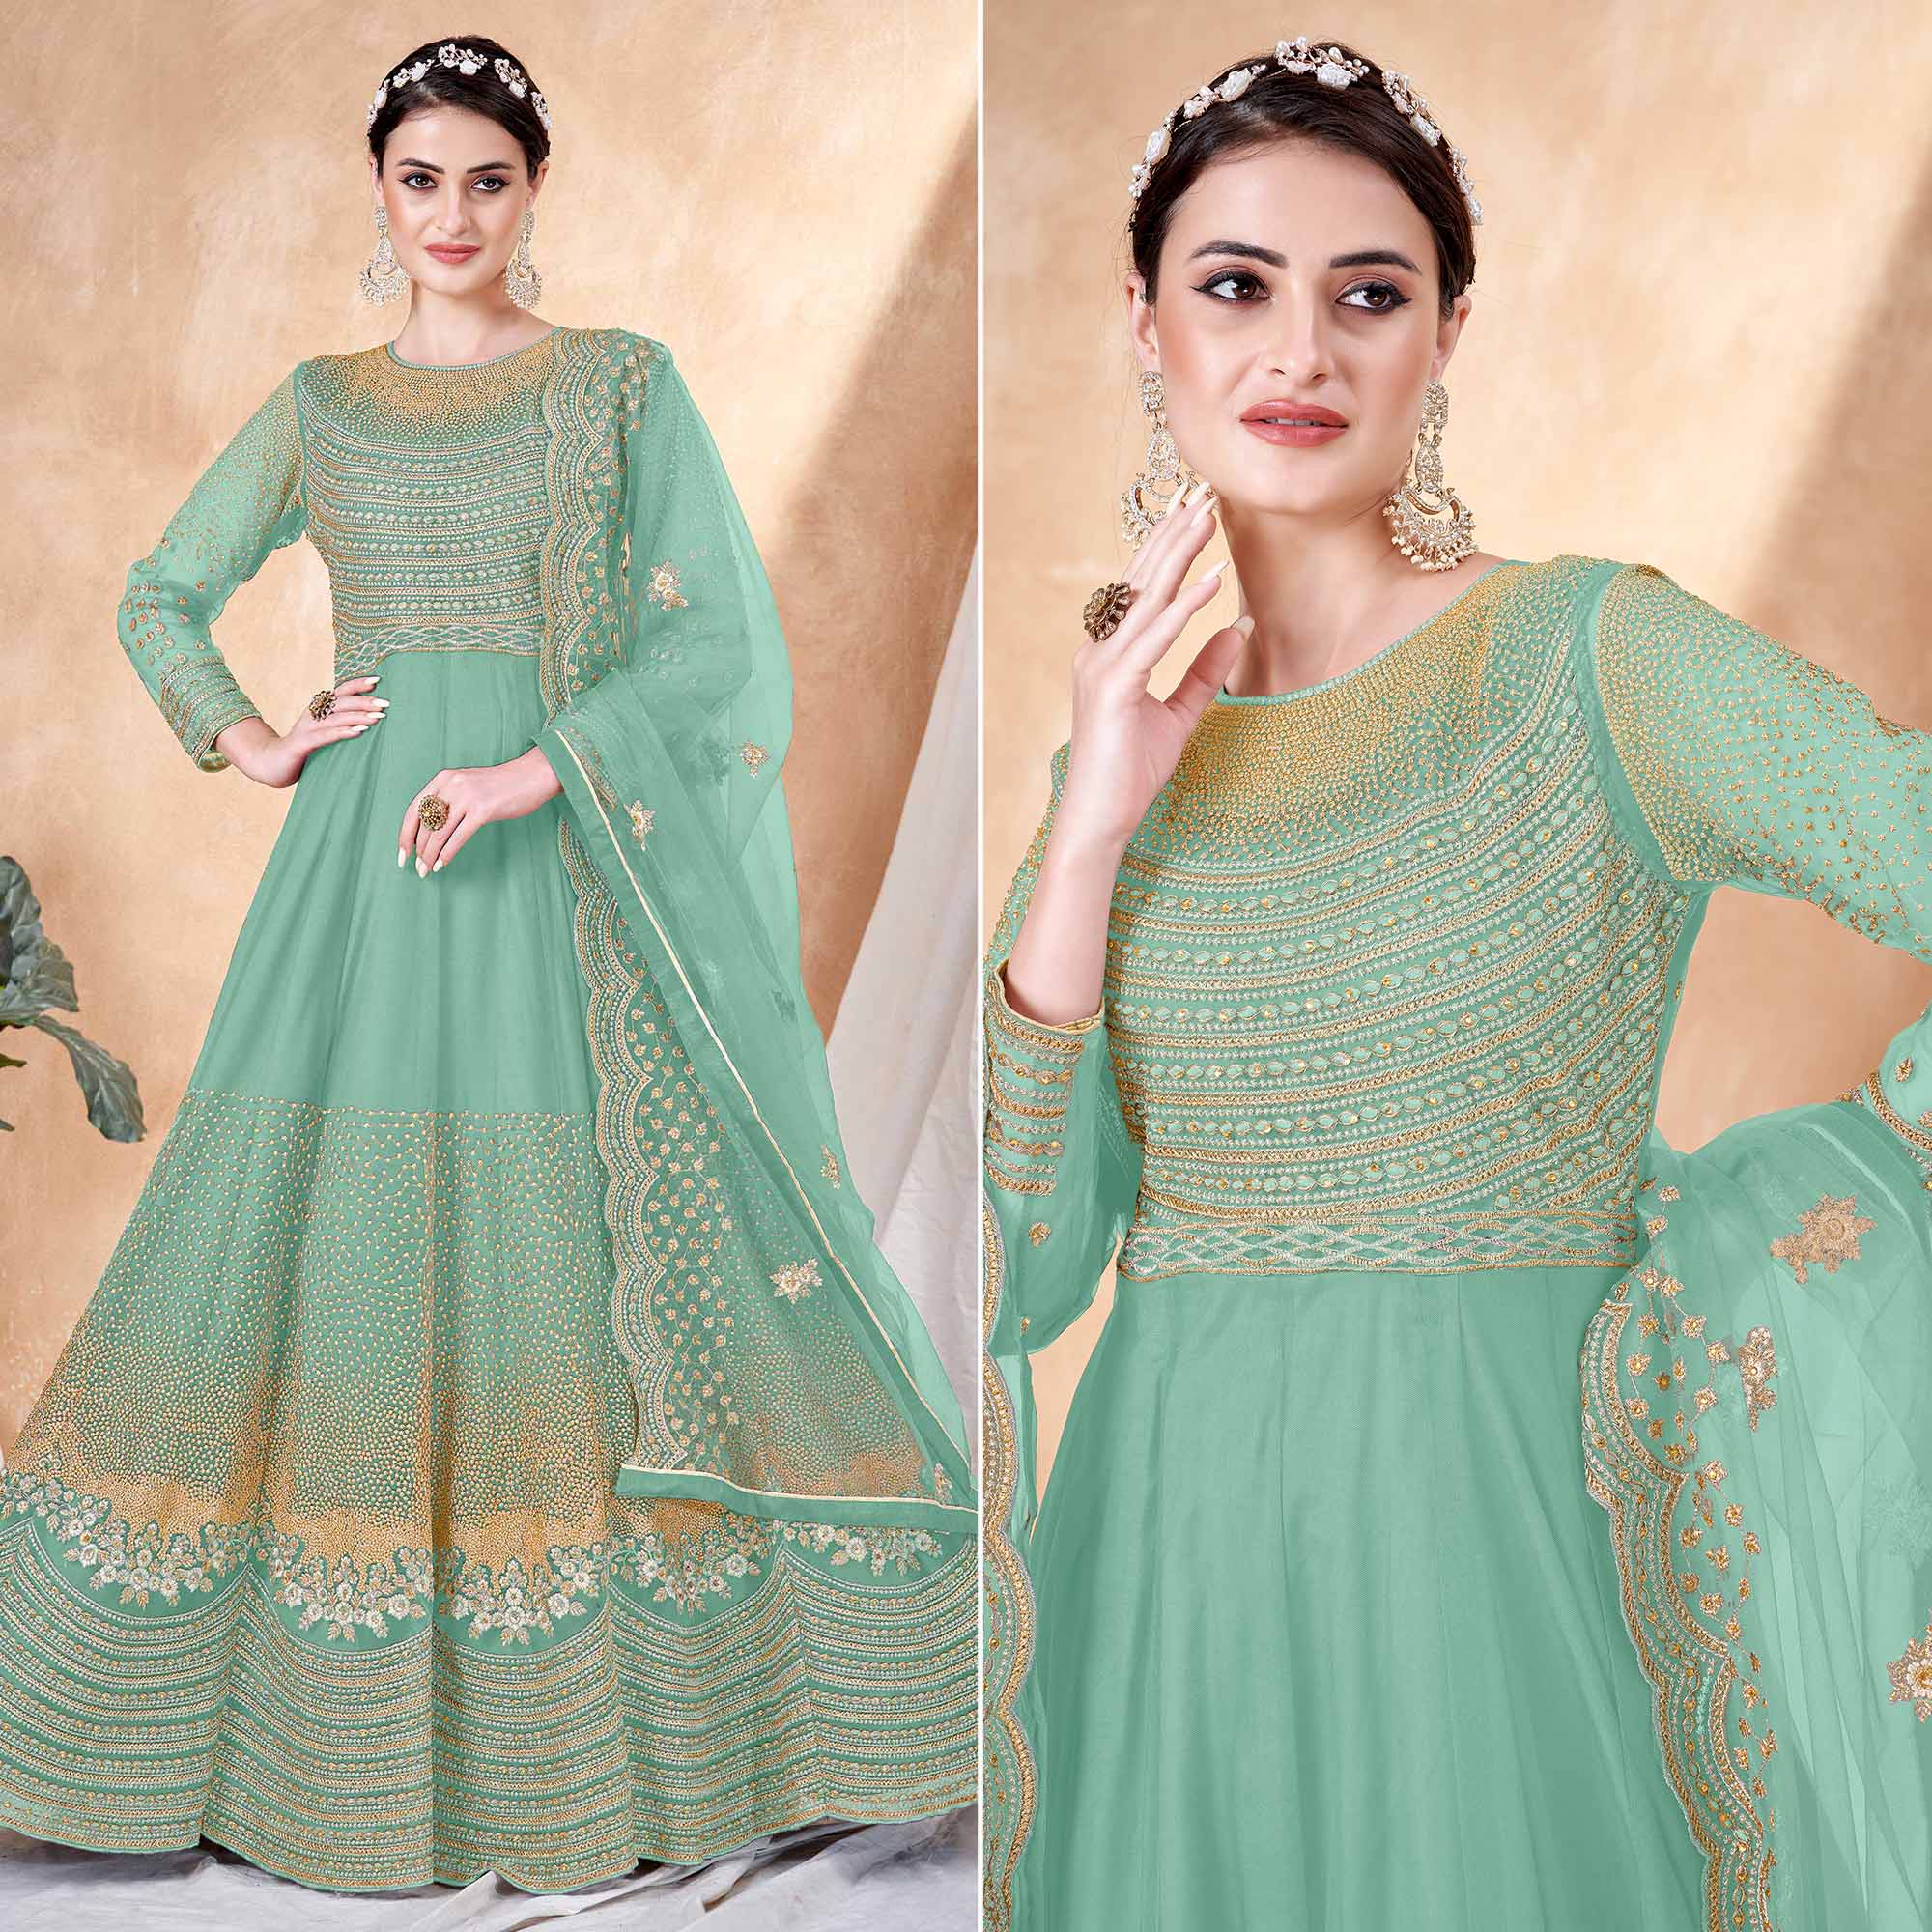 Turquoise Floral Embroidered Net Semi Stitched Anarkali Suit